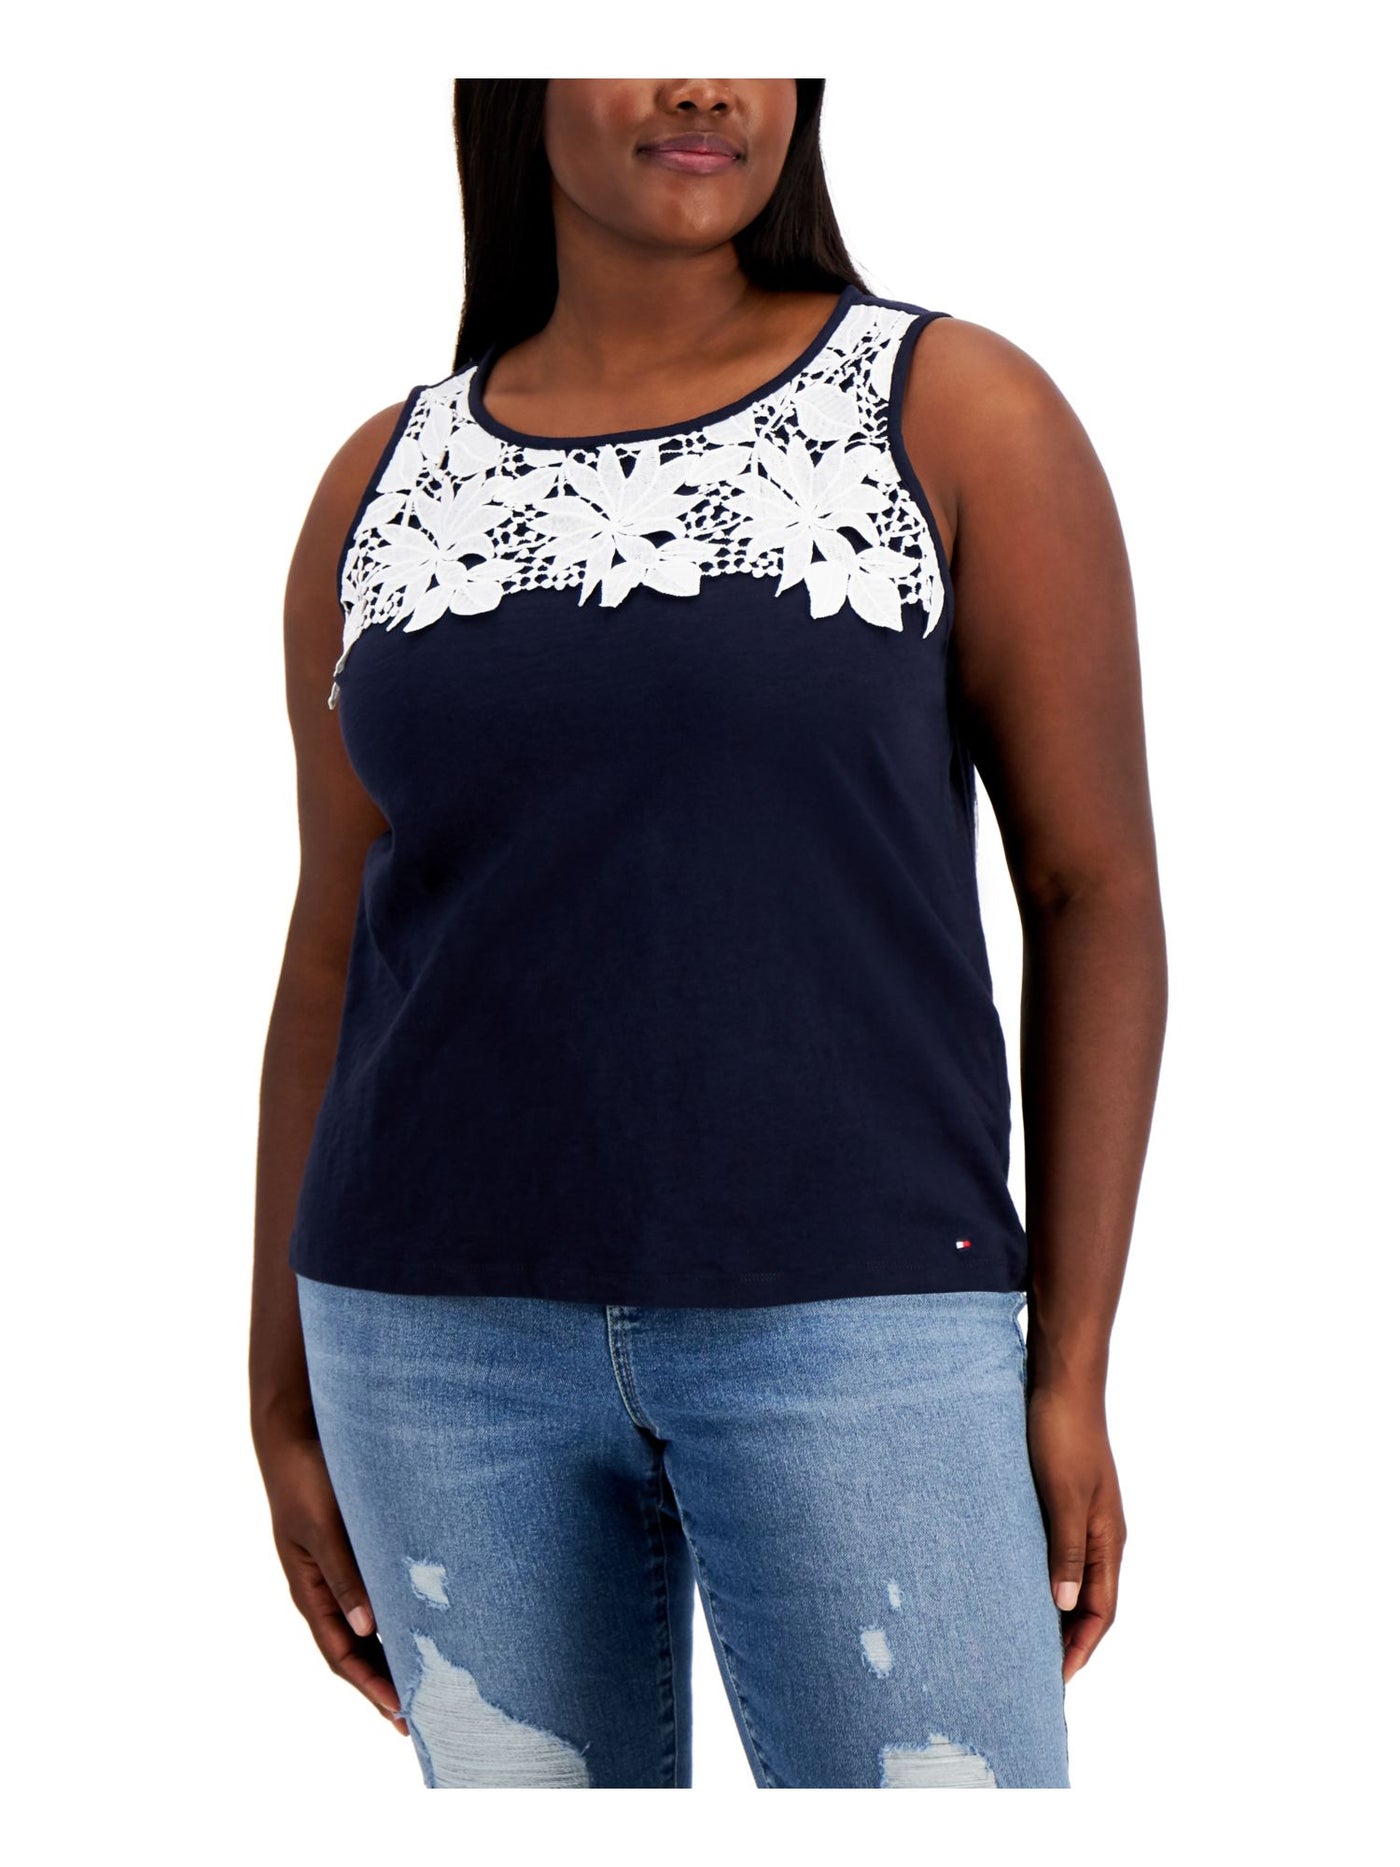 TOMMY HILFIGER Womens Navy Floral Scoop Neck Tank Top Plus 1X